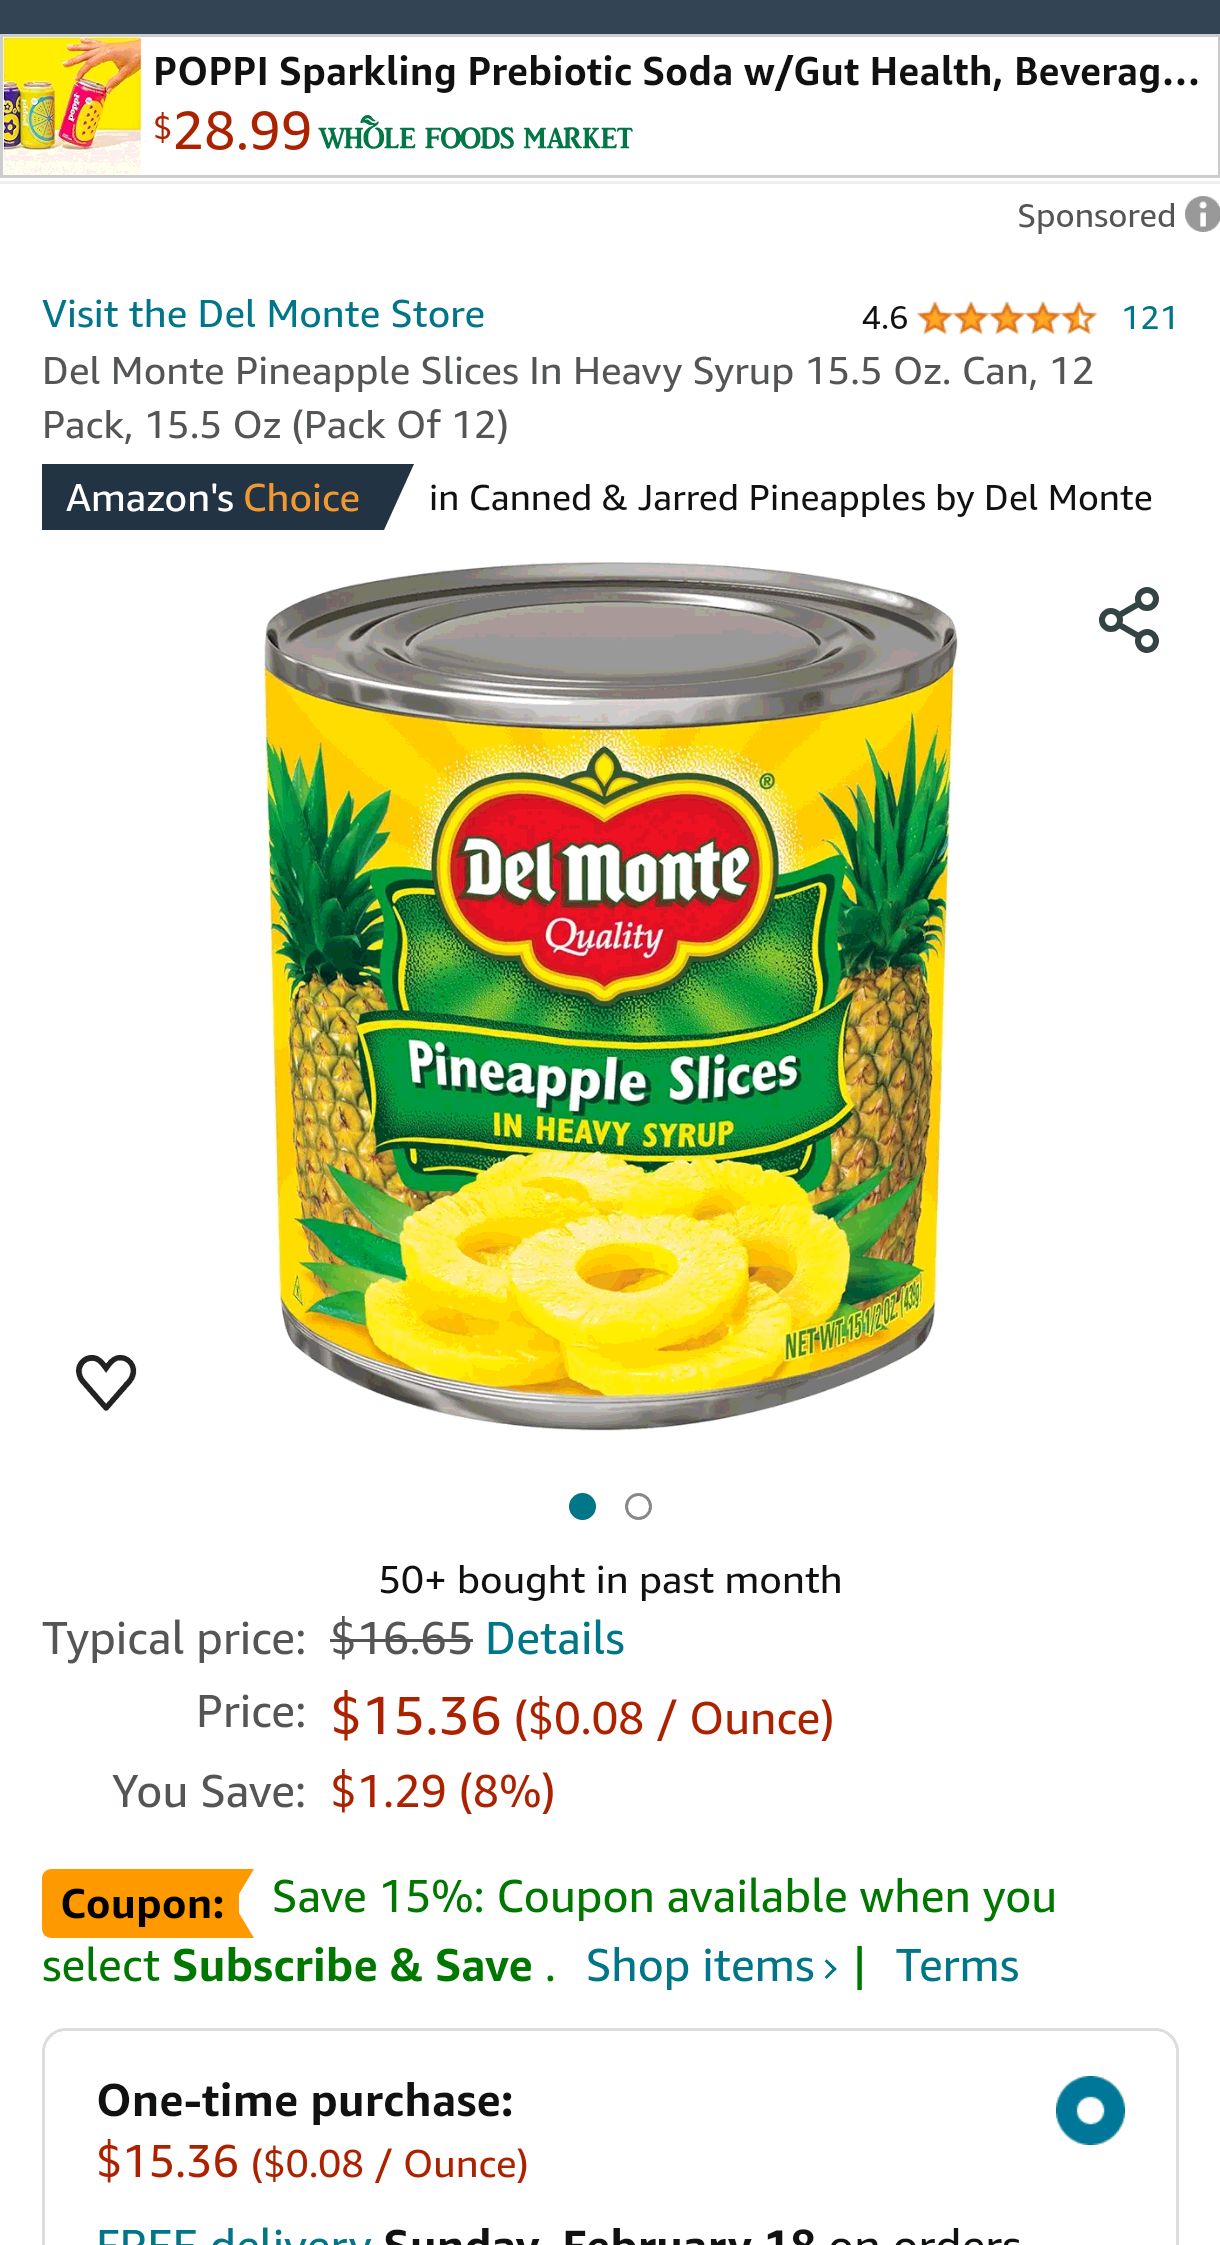 Amazon.com : Del Monte Pineapple Slices In Heavy Syrup 15.5 Oz. Can, 12 Pack, 15.5 Oz (Pack Of 12) : Grocery & Gourmet Food